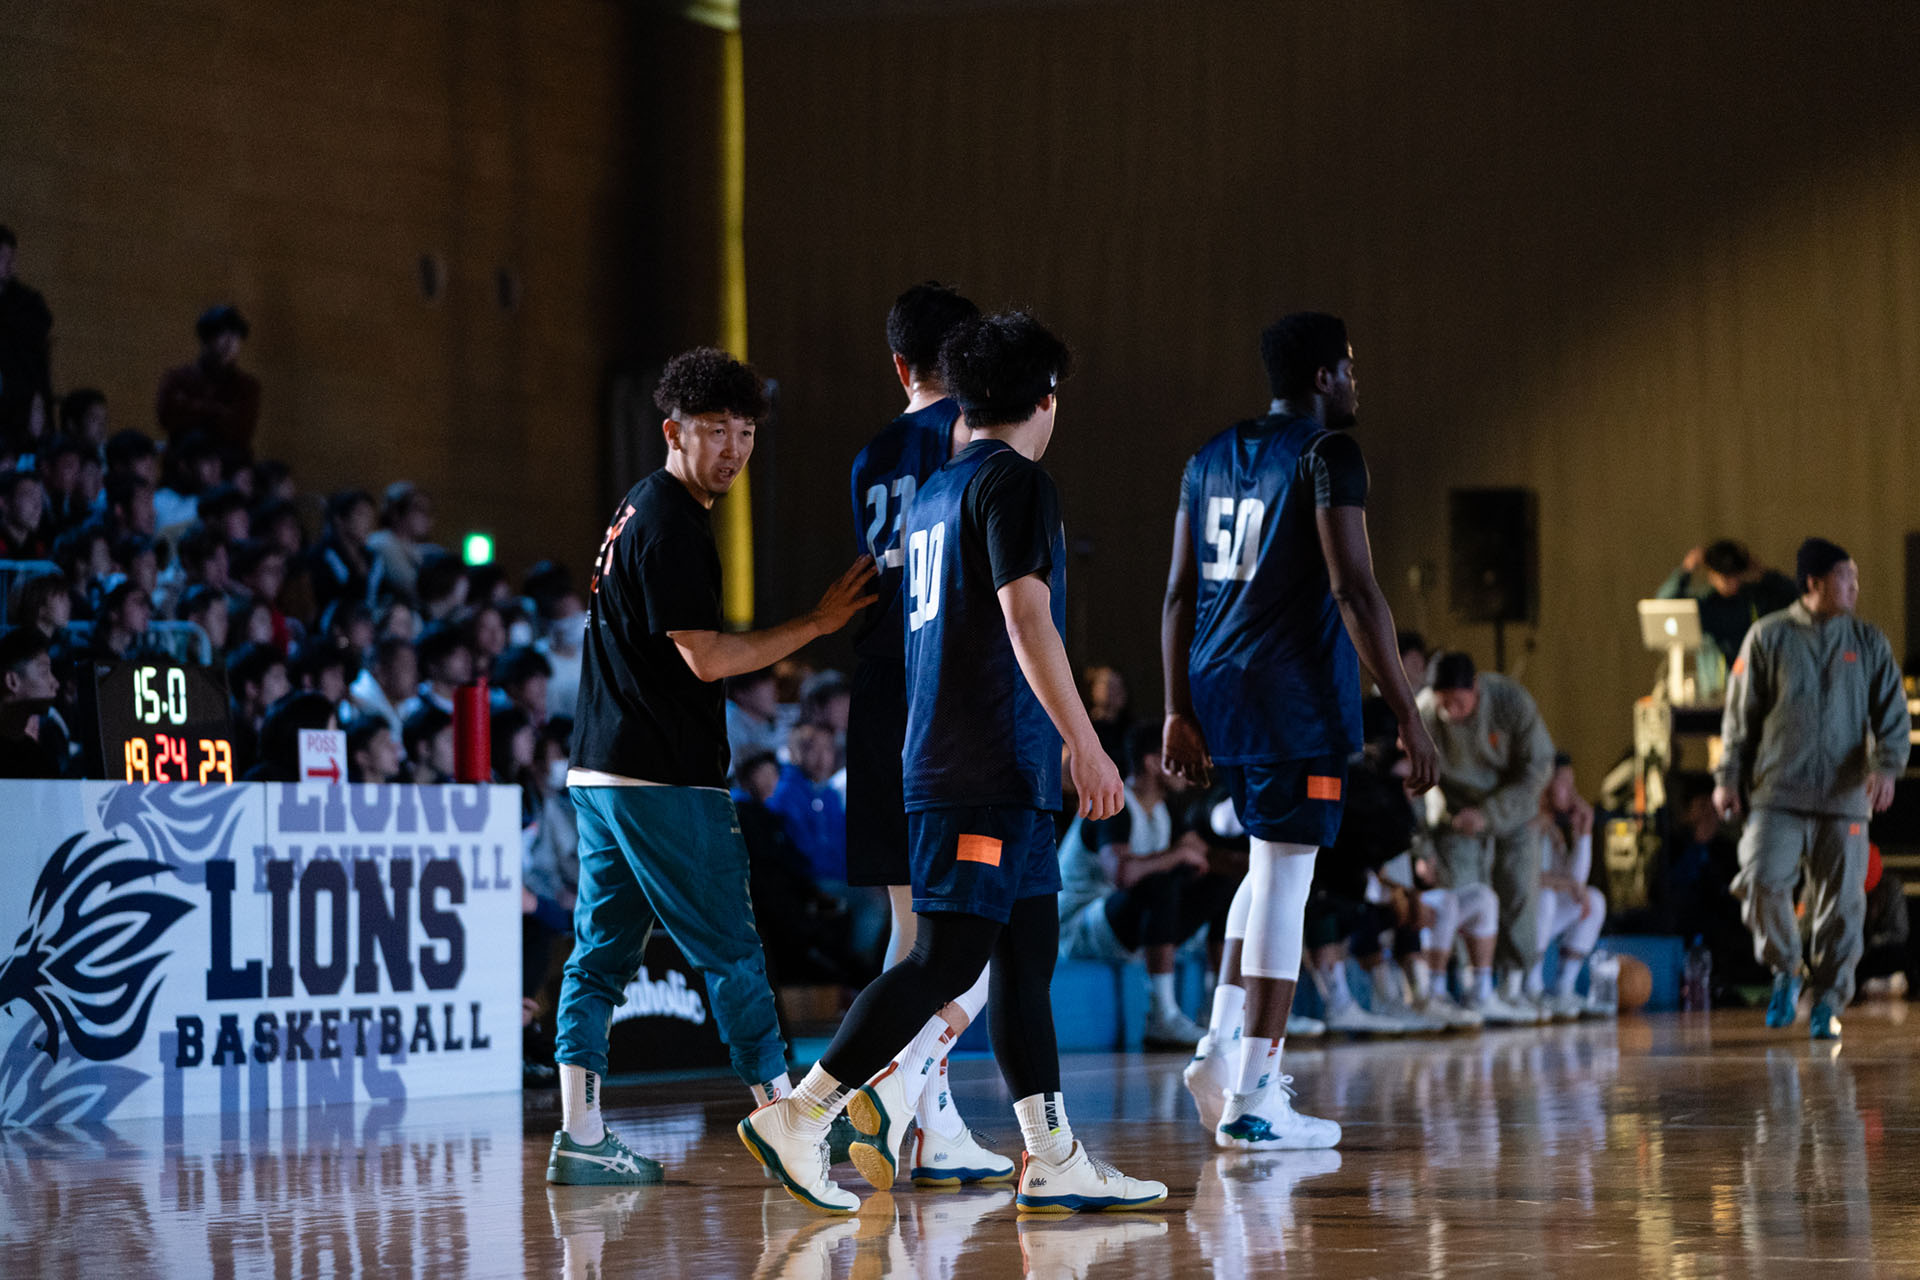 TOKYO STREETBALL CLASSIC 2020 レポート ｜ FLY BASKETBALL CULTURE ...